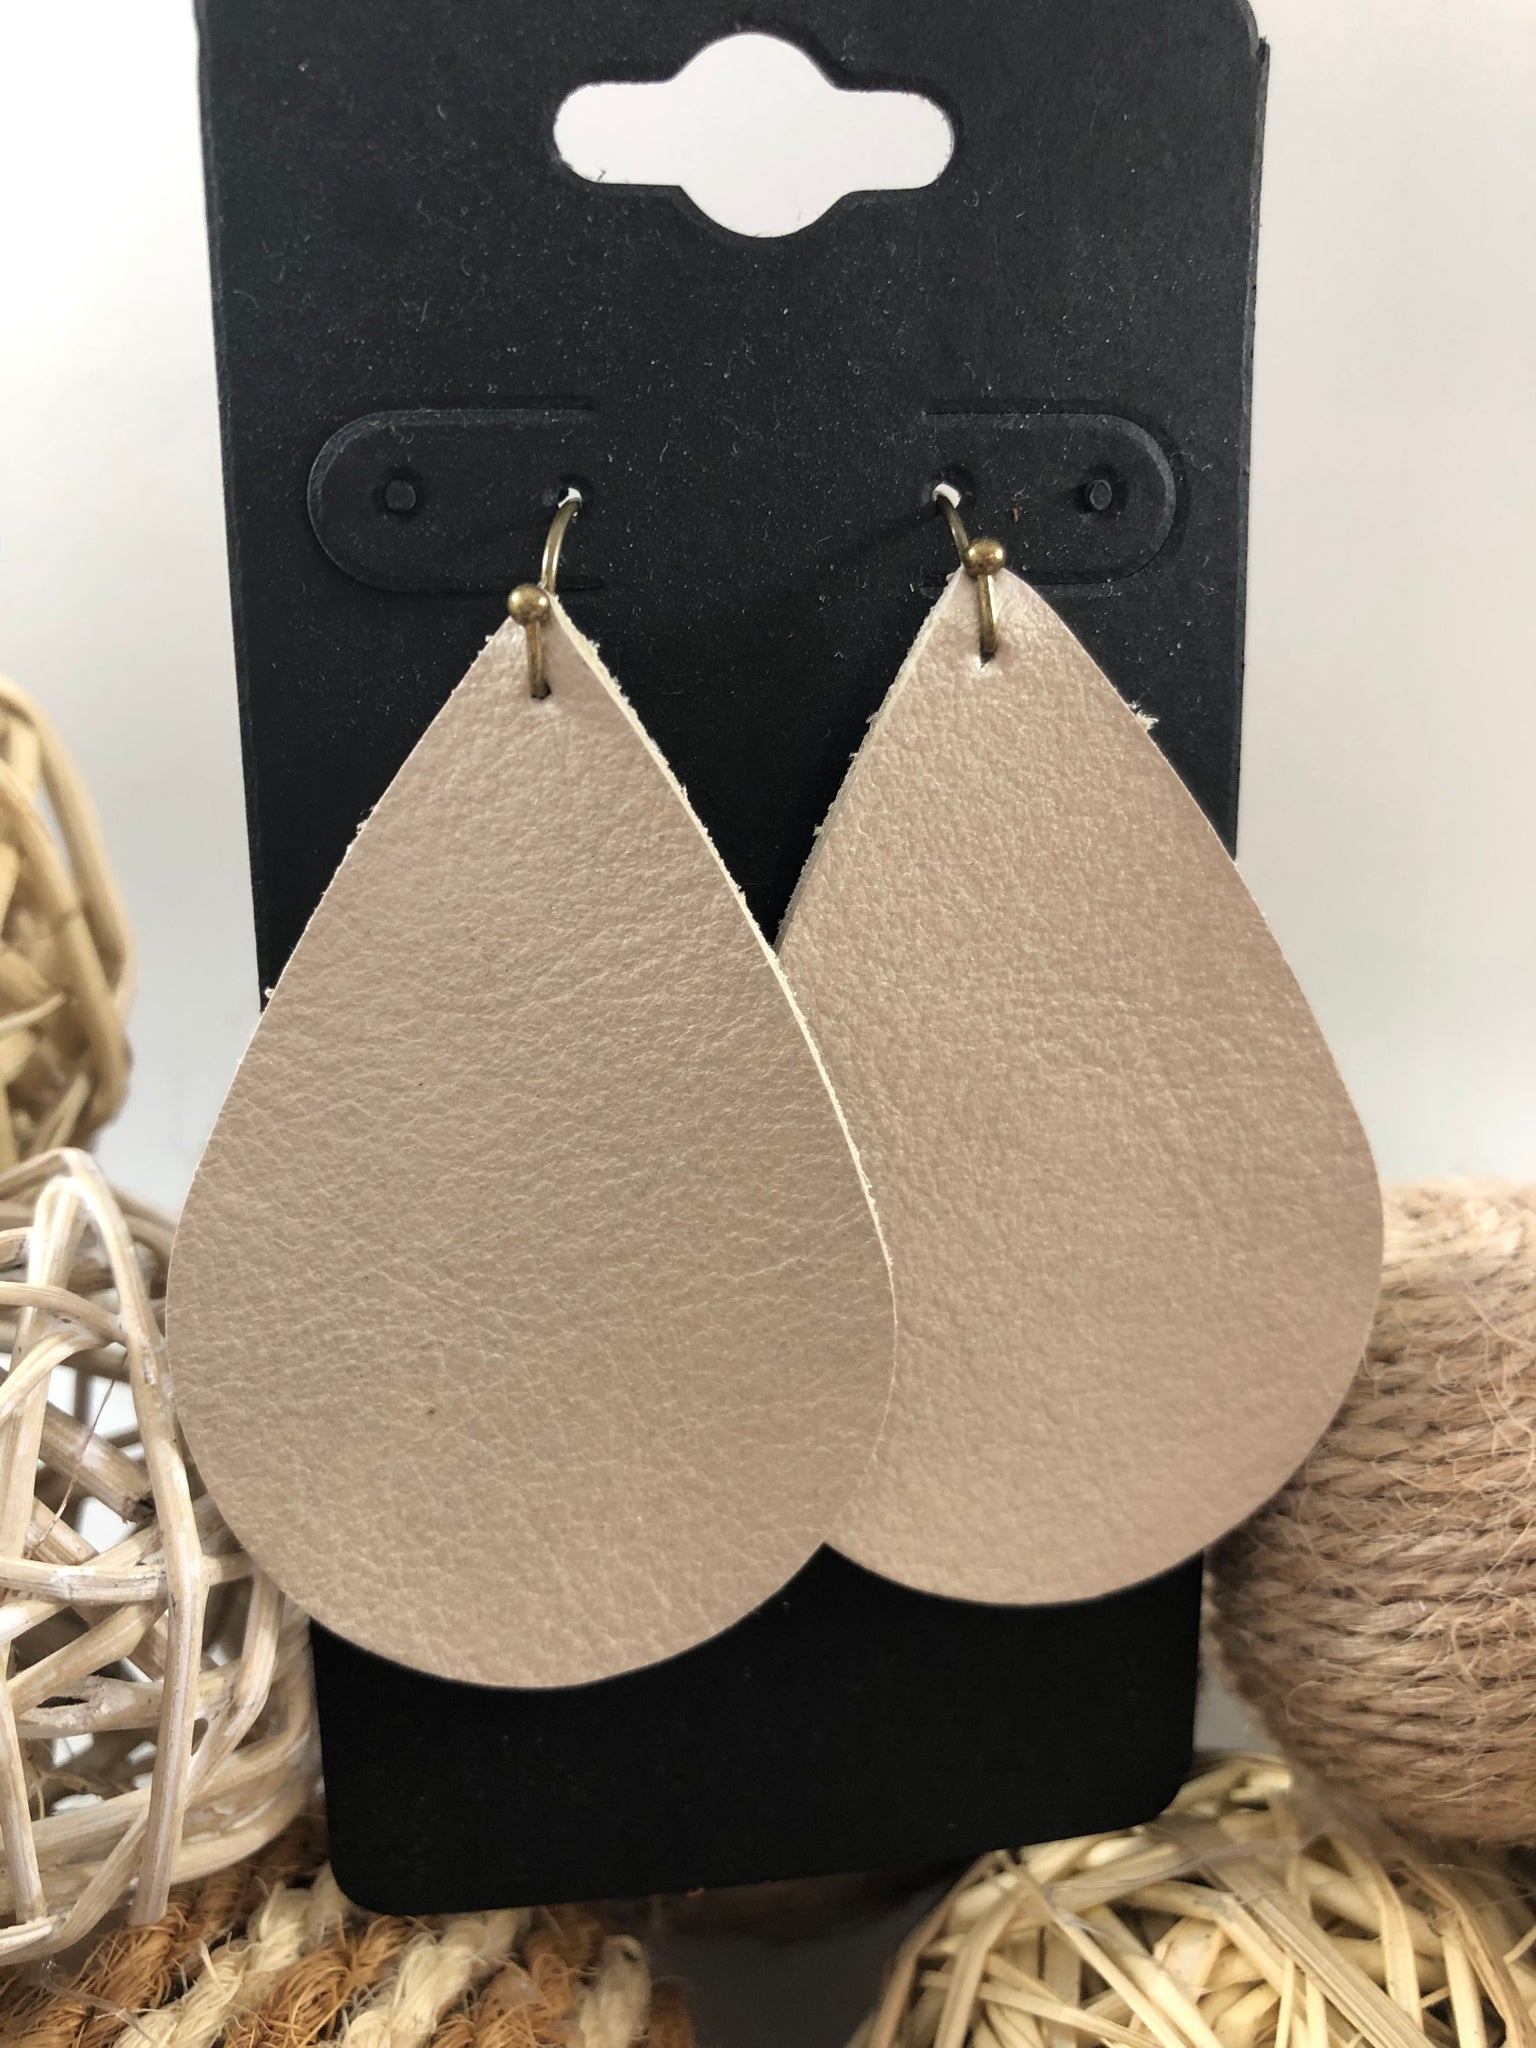 Cream leather earrings with a pearly sheen